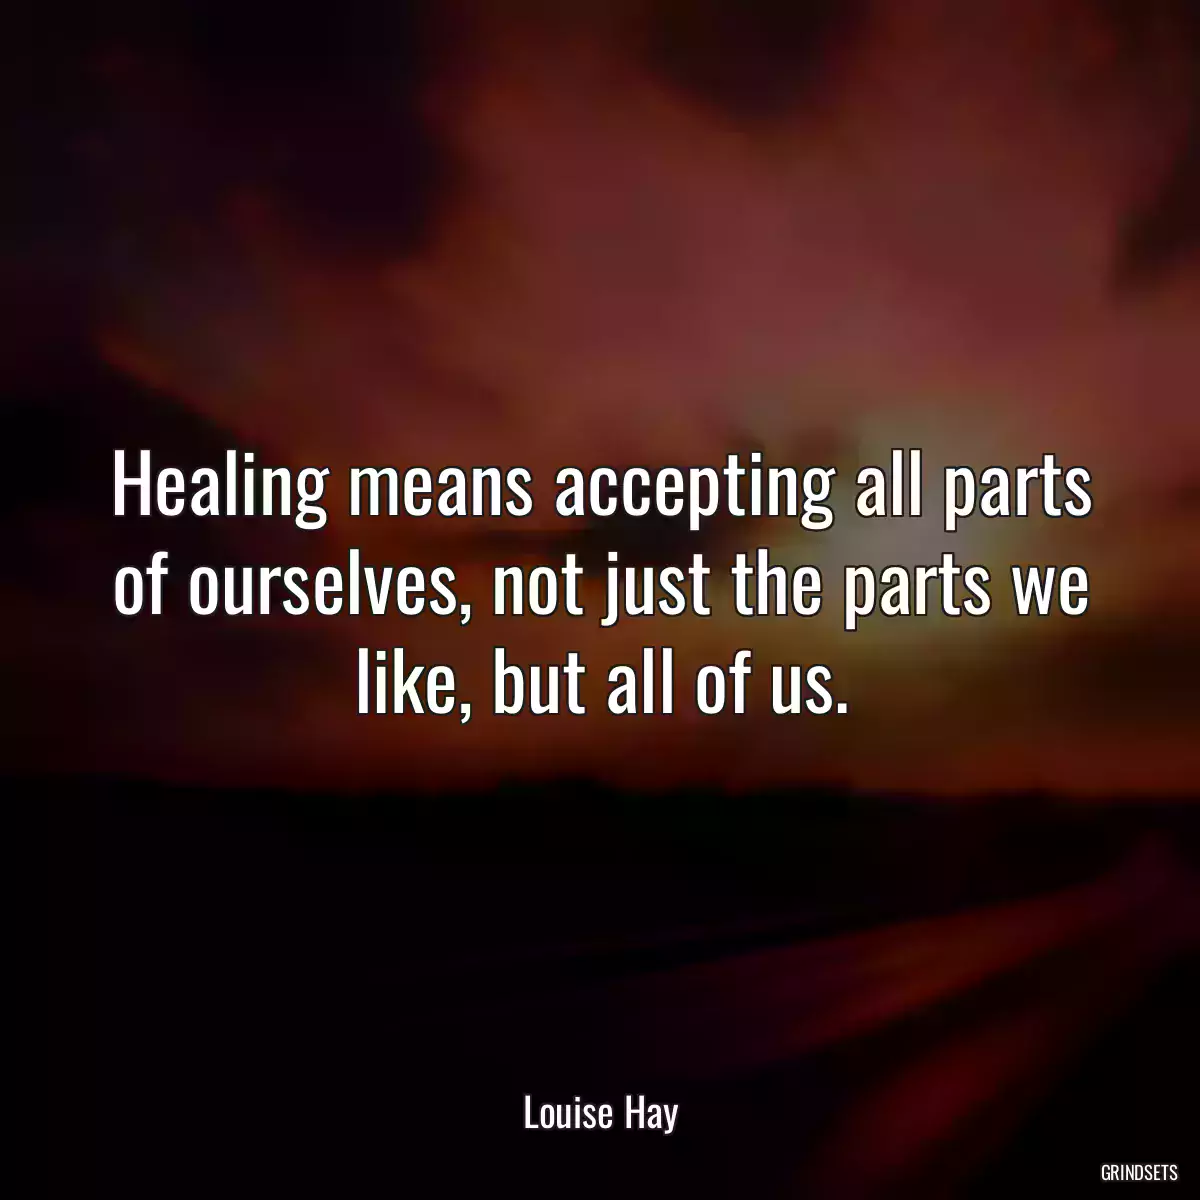 Healing means accepting all parts of ourselves, not just the parts we like, but all of us.